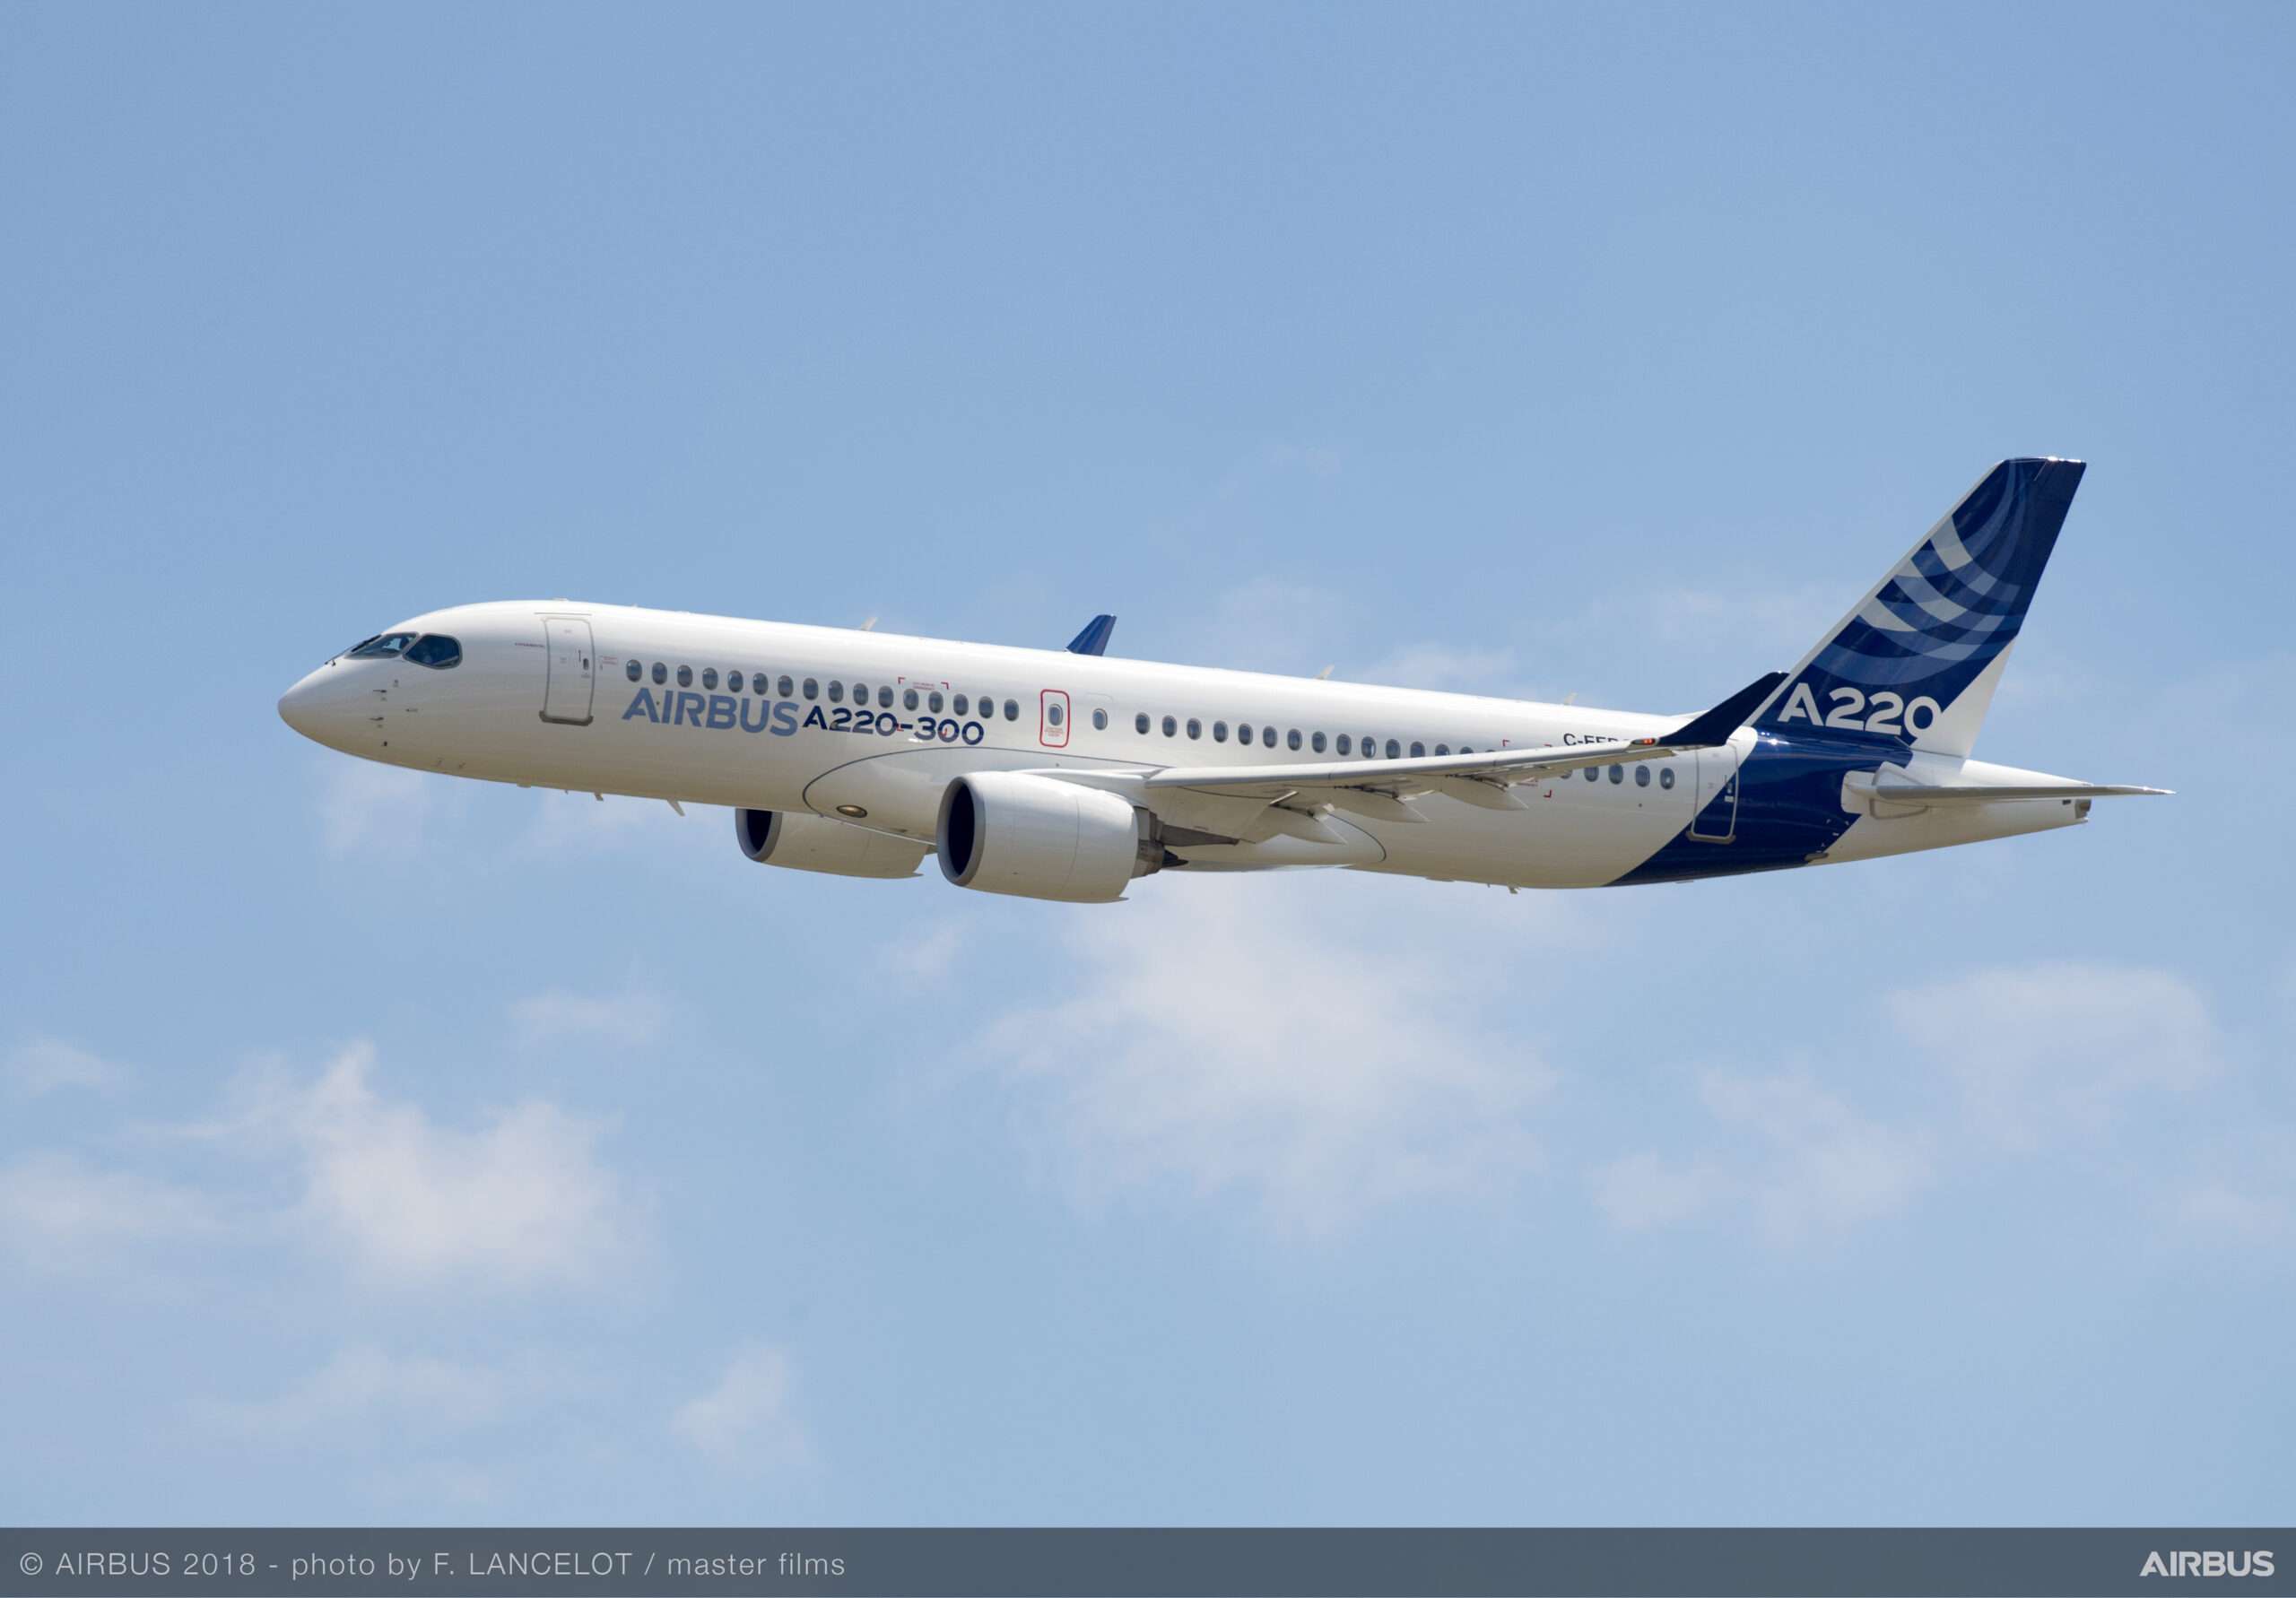 Celebrating 10 Years of Excellence: The Airbus A220 Program